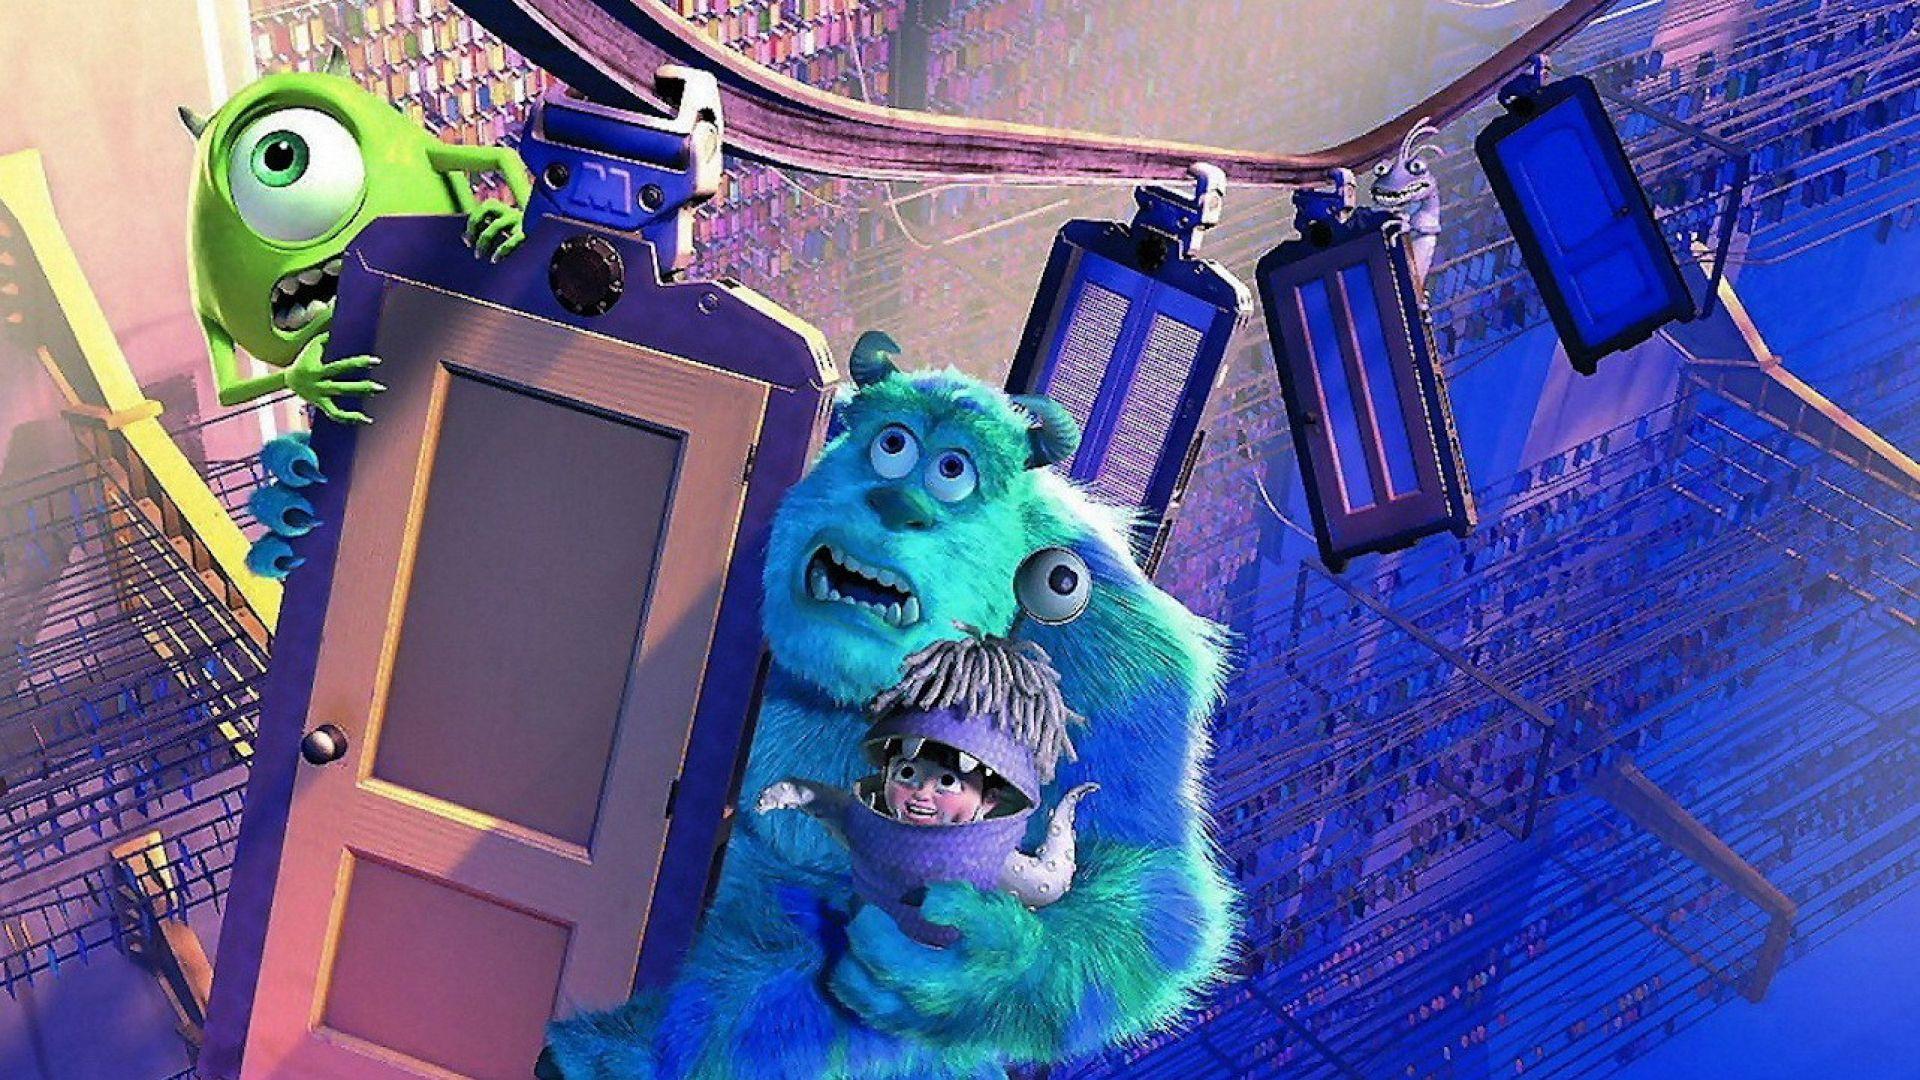 Monsters Inc Wallpaper High Quality